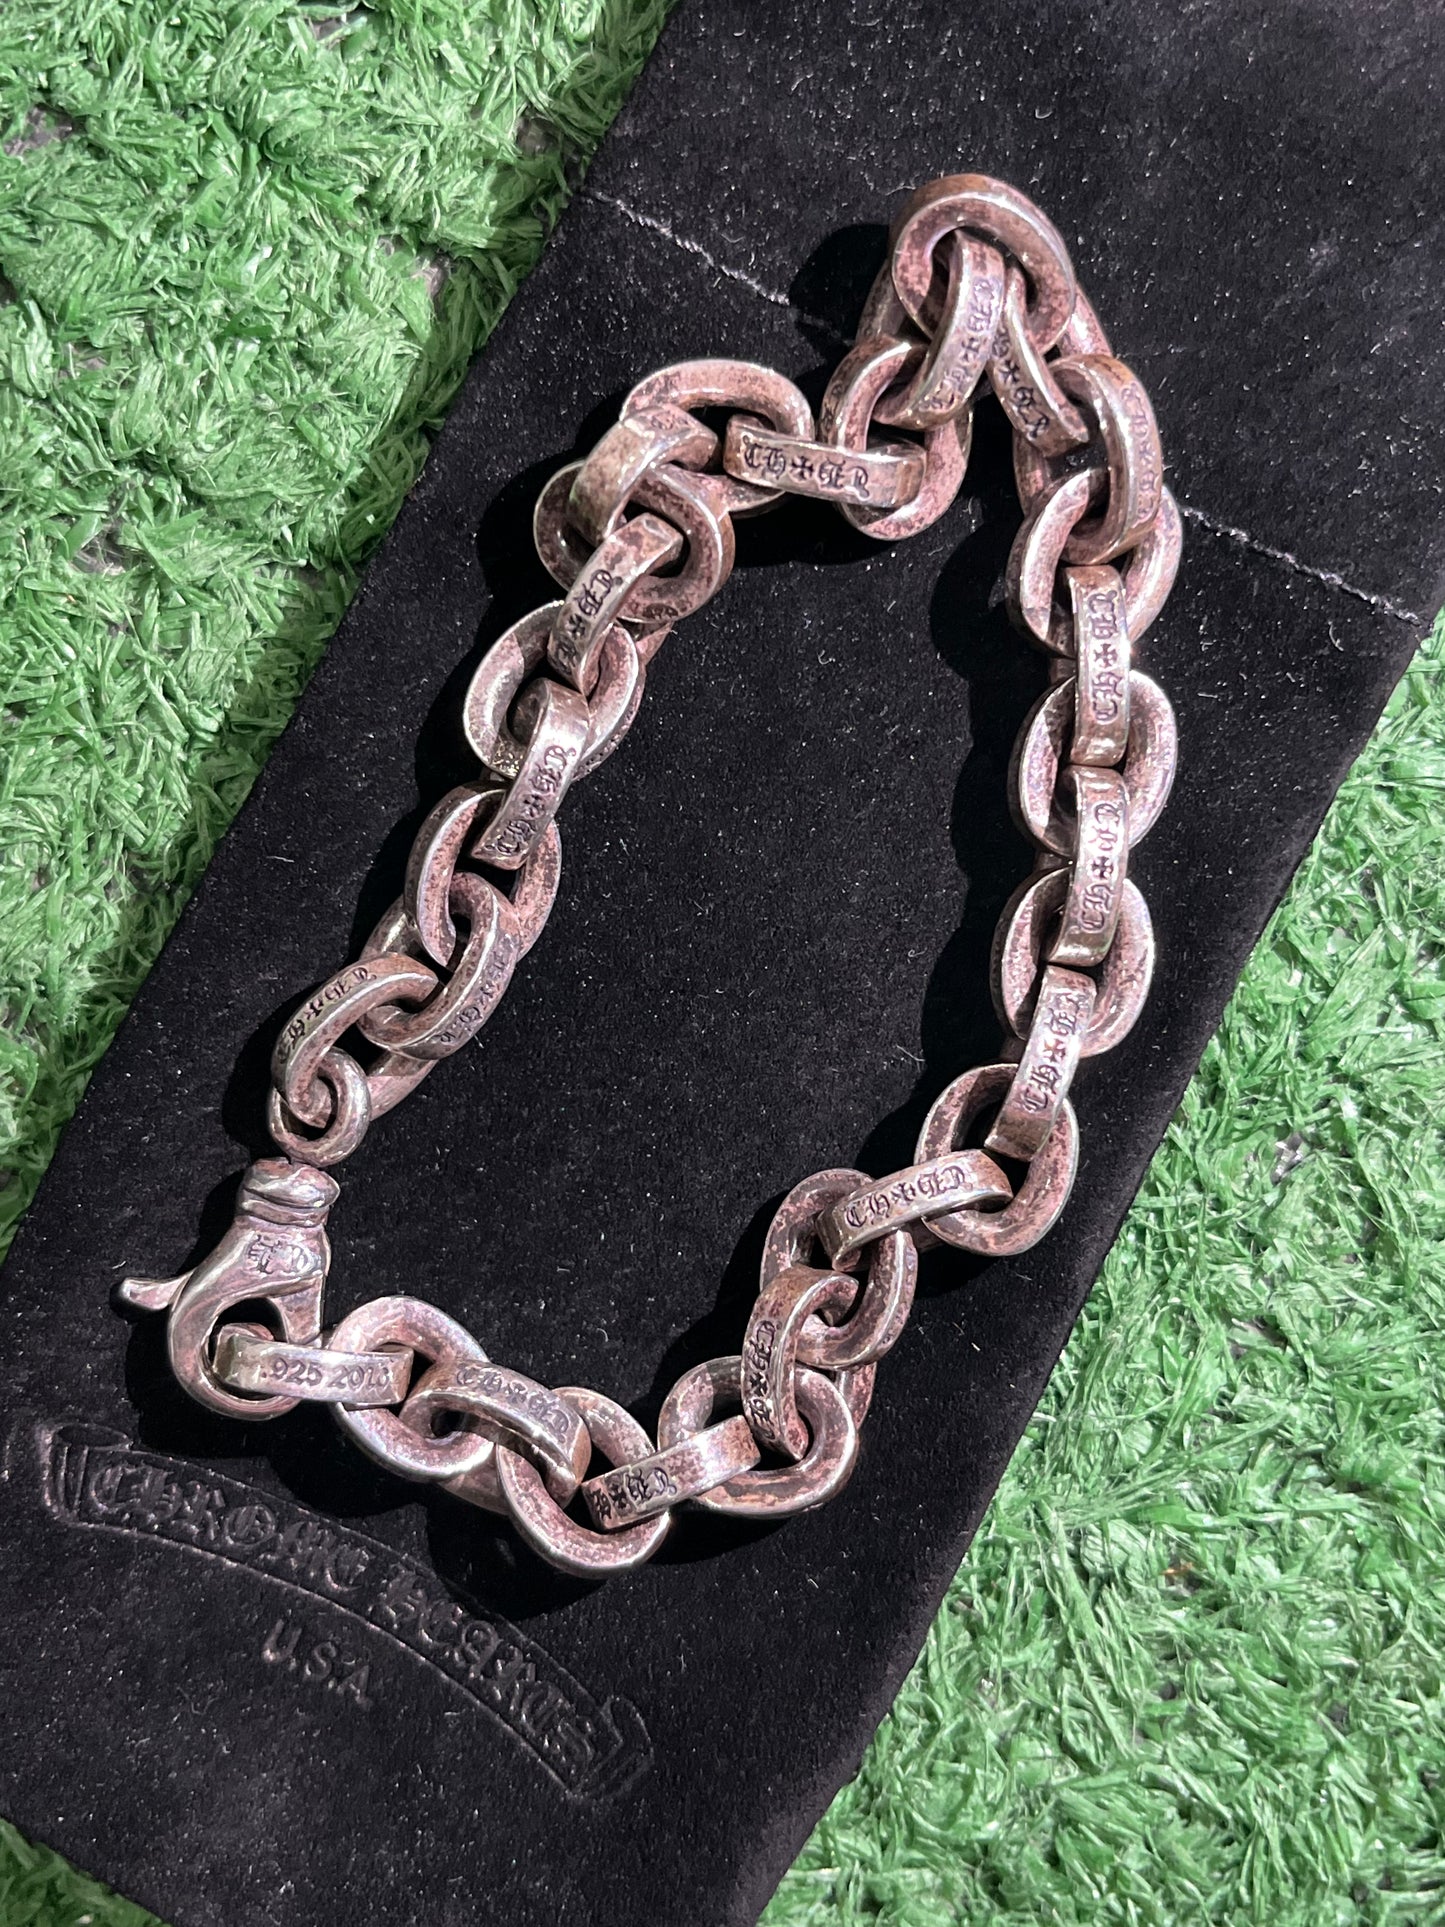 Chrome Hearts Silver Paper Chain Bracelet (8 Inches)